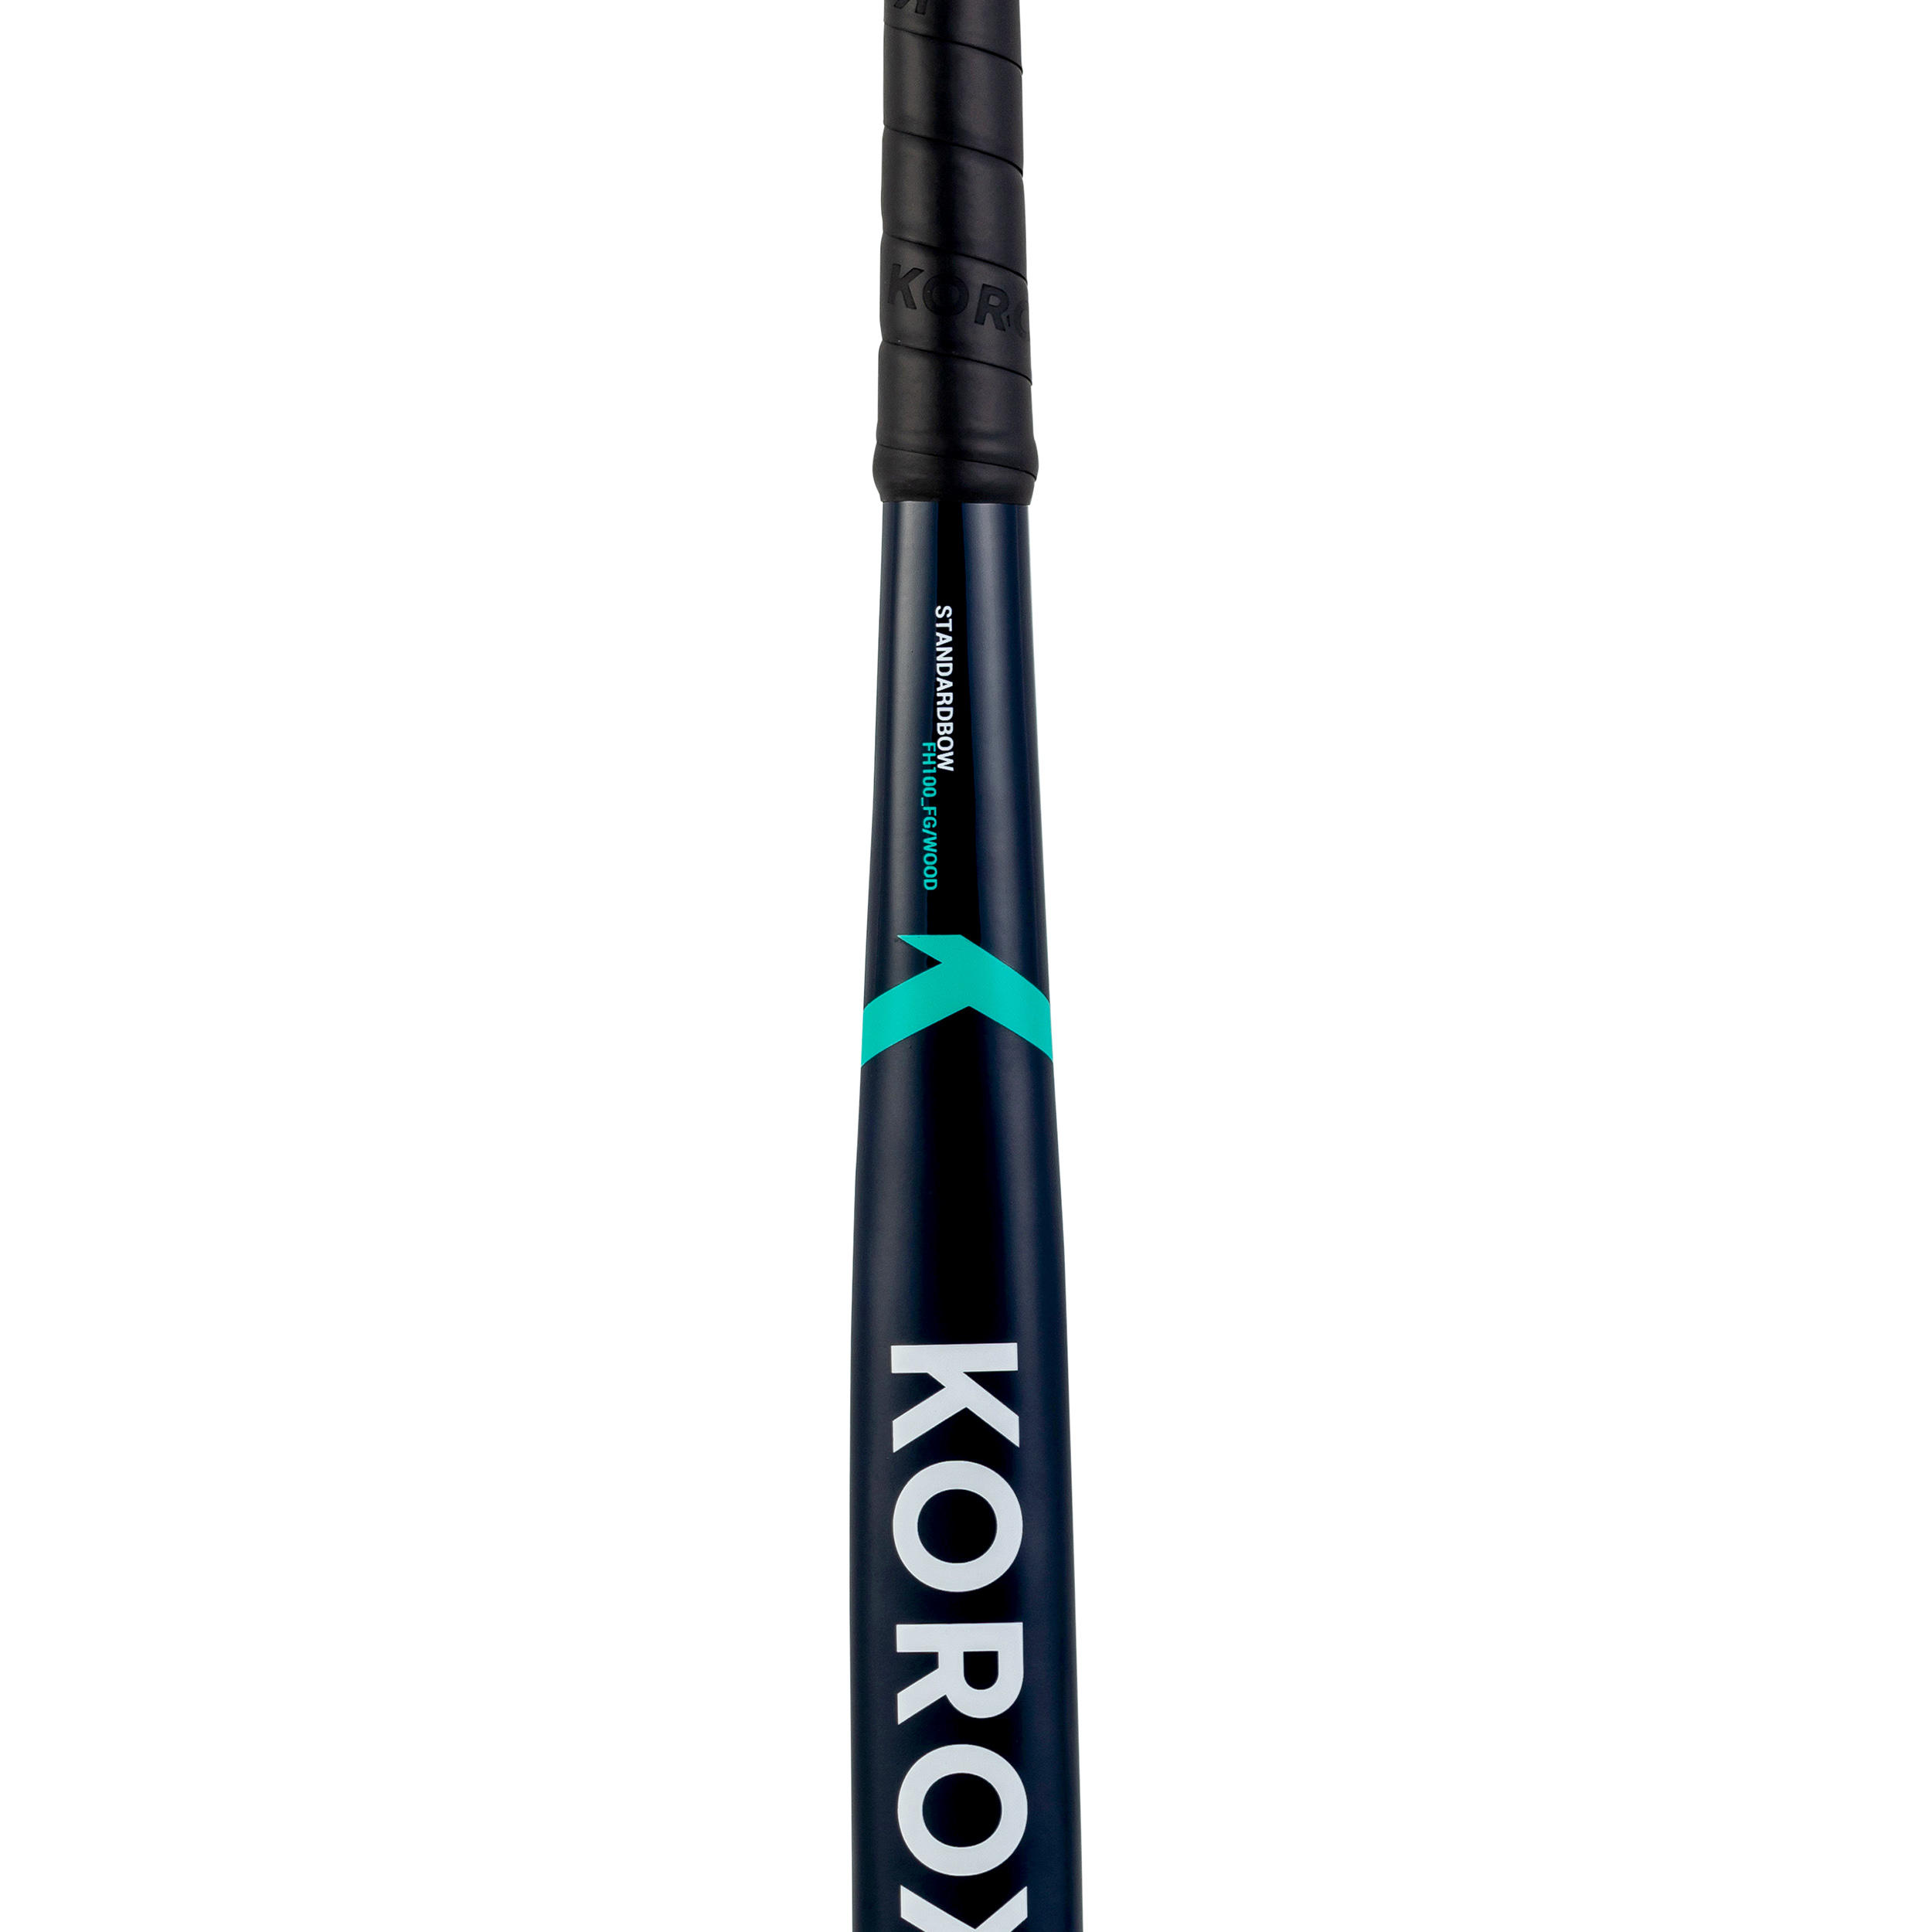 Adult Occasional Wood/Fibreglass Field Hockey Stick FH100 - Turquoise Blue 12/12